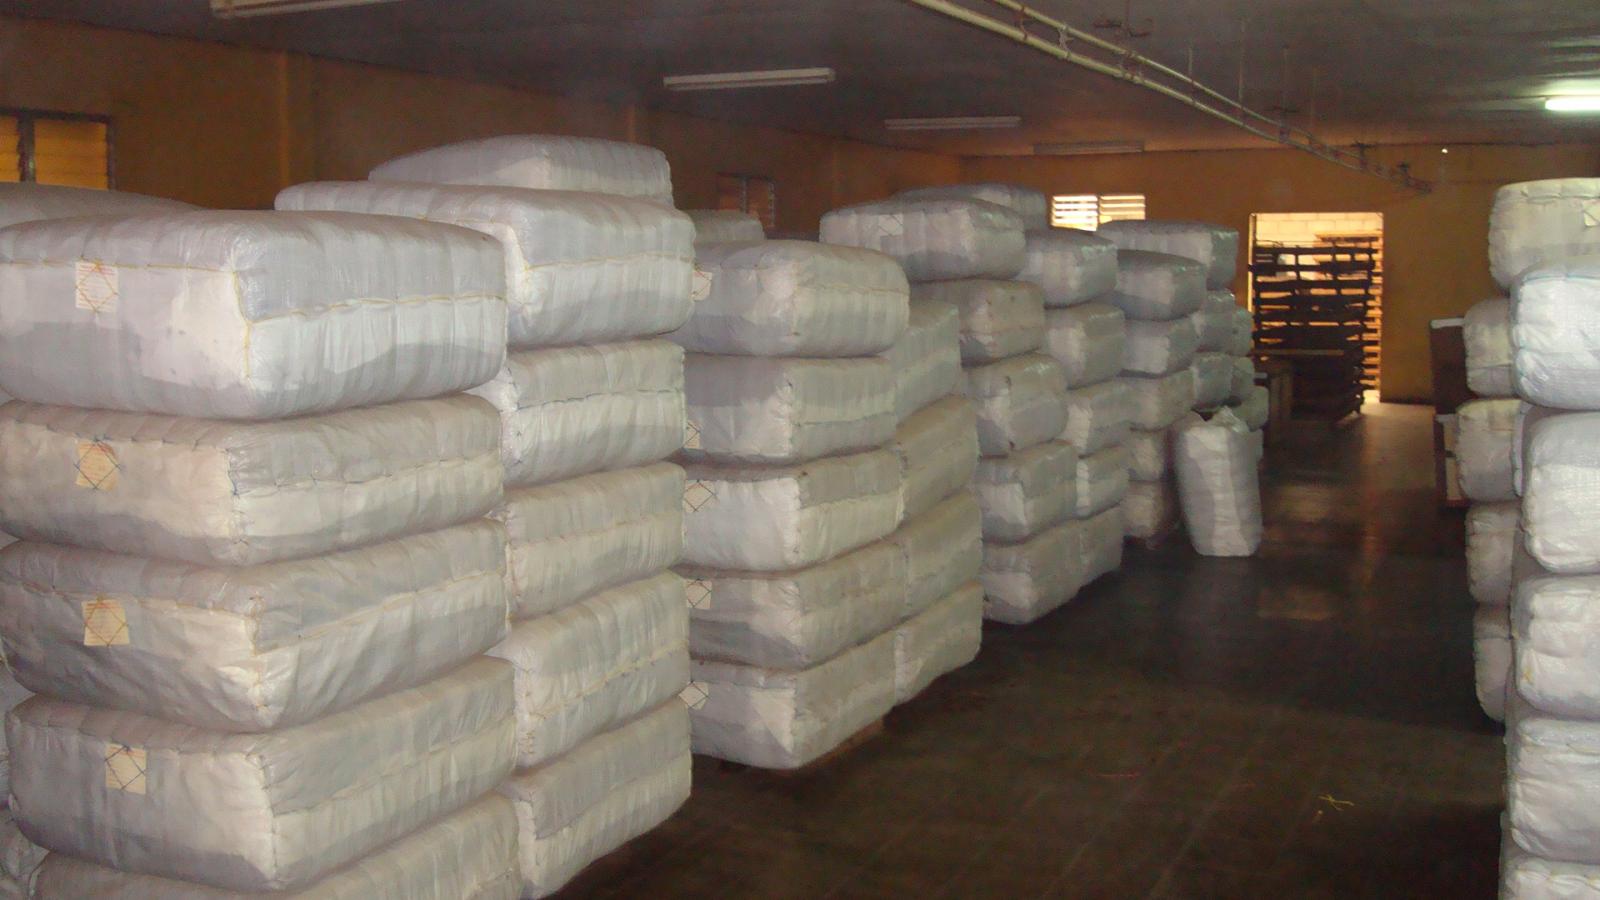 The Padrons have several warehouses, like this one, storing baled tobacco for aging.